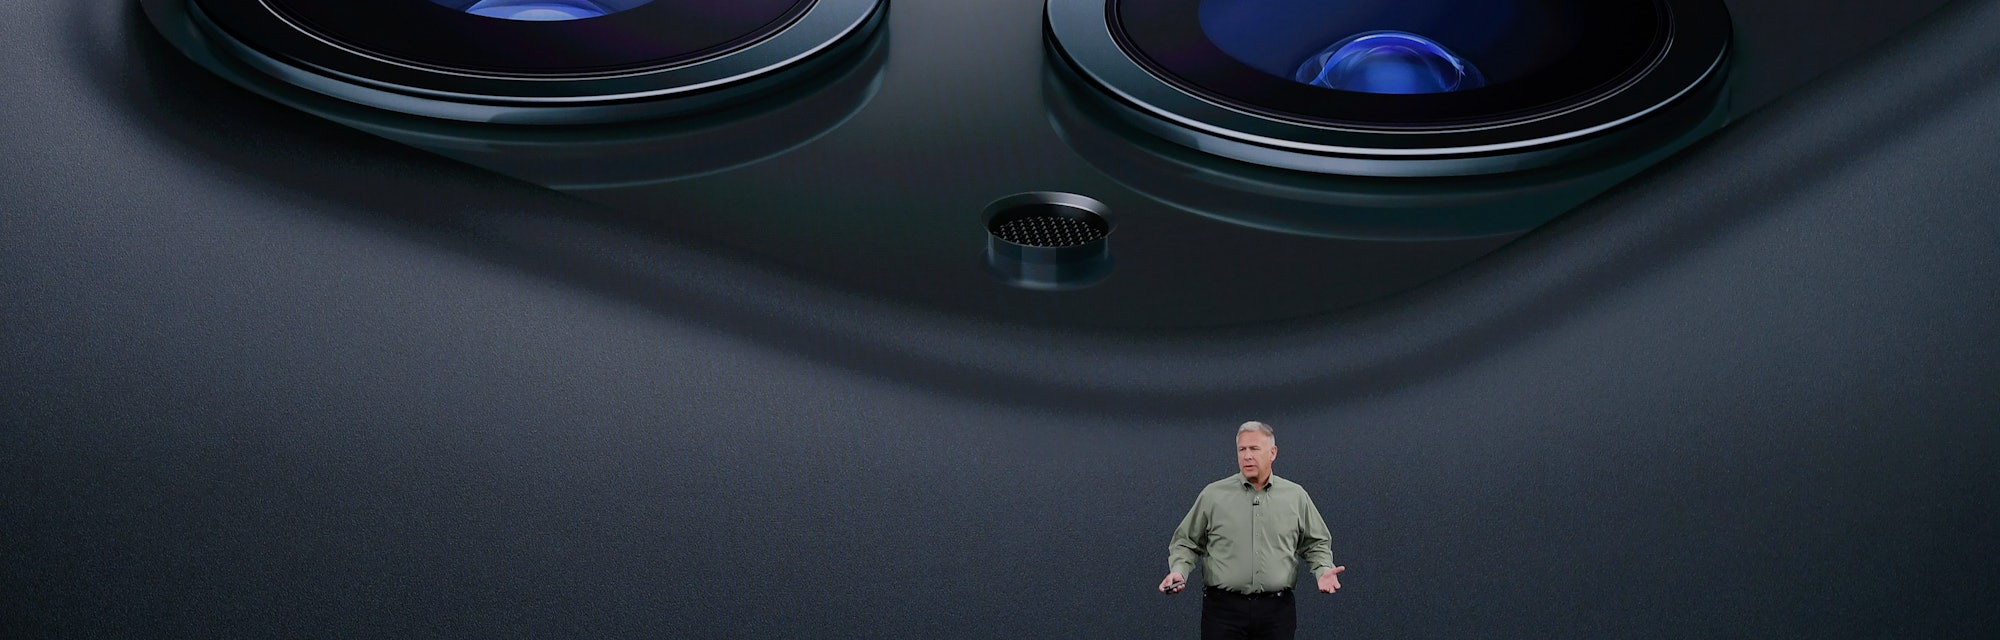 Apple Senior Vice President of Worldwide Marketing Phil Schiller speaks on-stage during a product la...